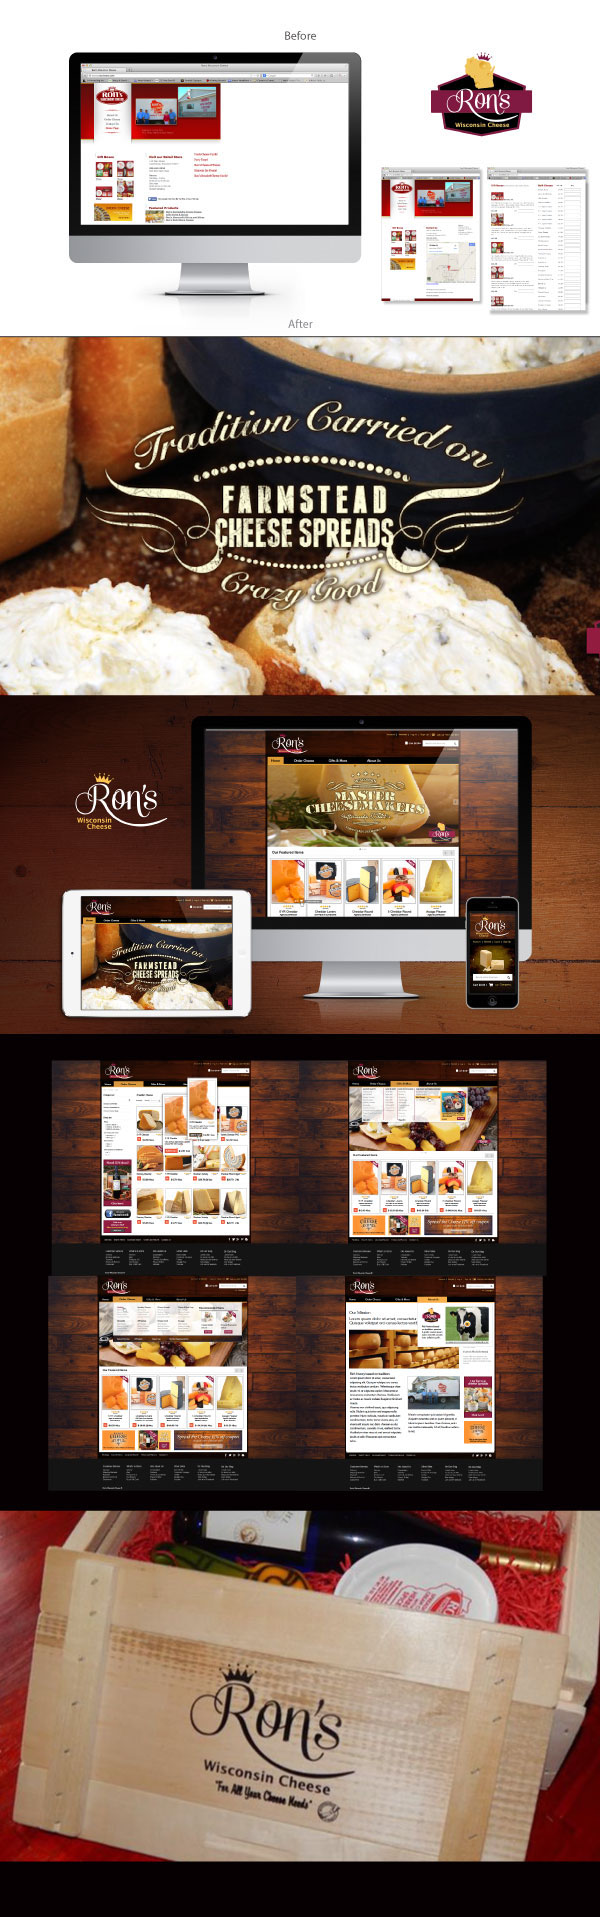 Adobe Portfolio front end web design rich tradition family pride master cheesemakers Cheese wood warm Quality welcome heritage browns earthtones